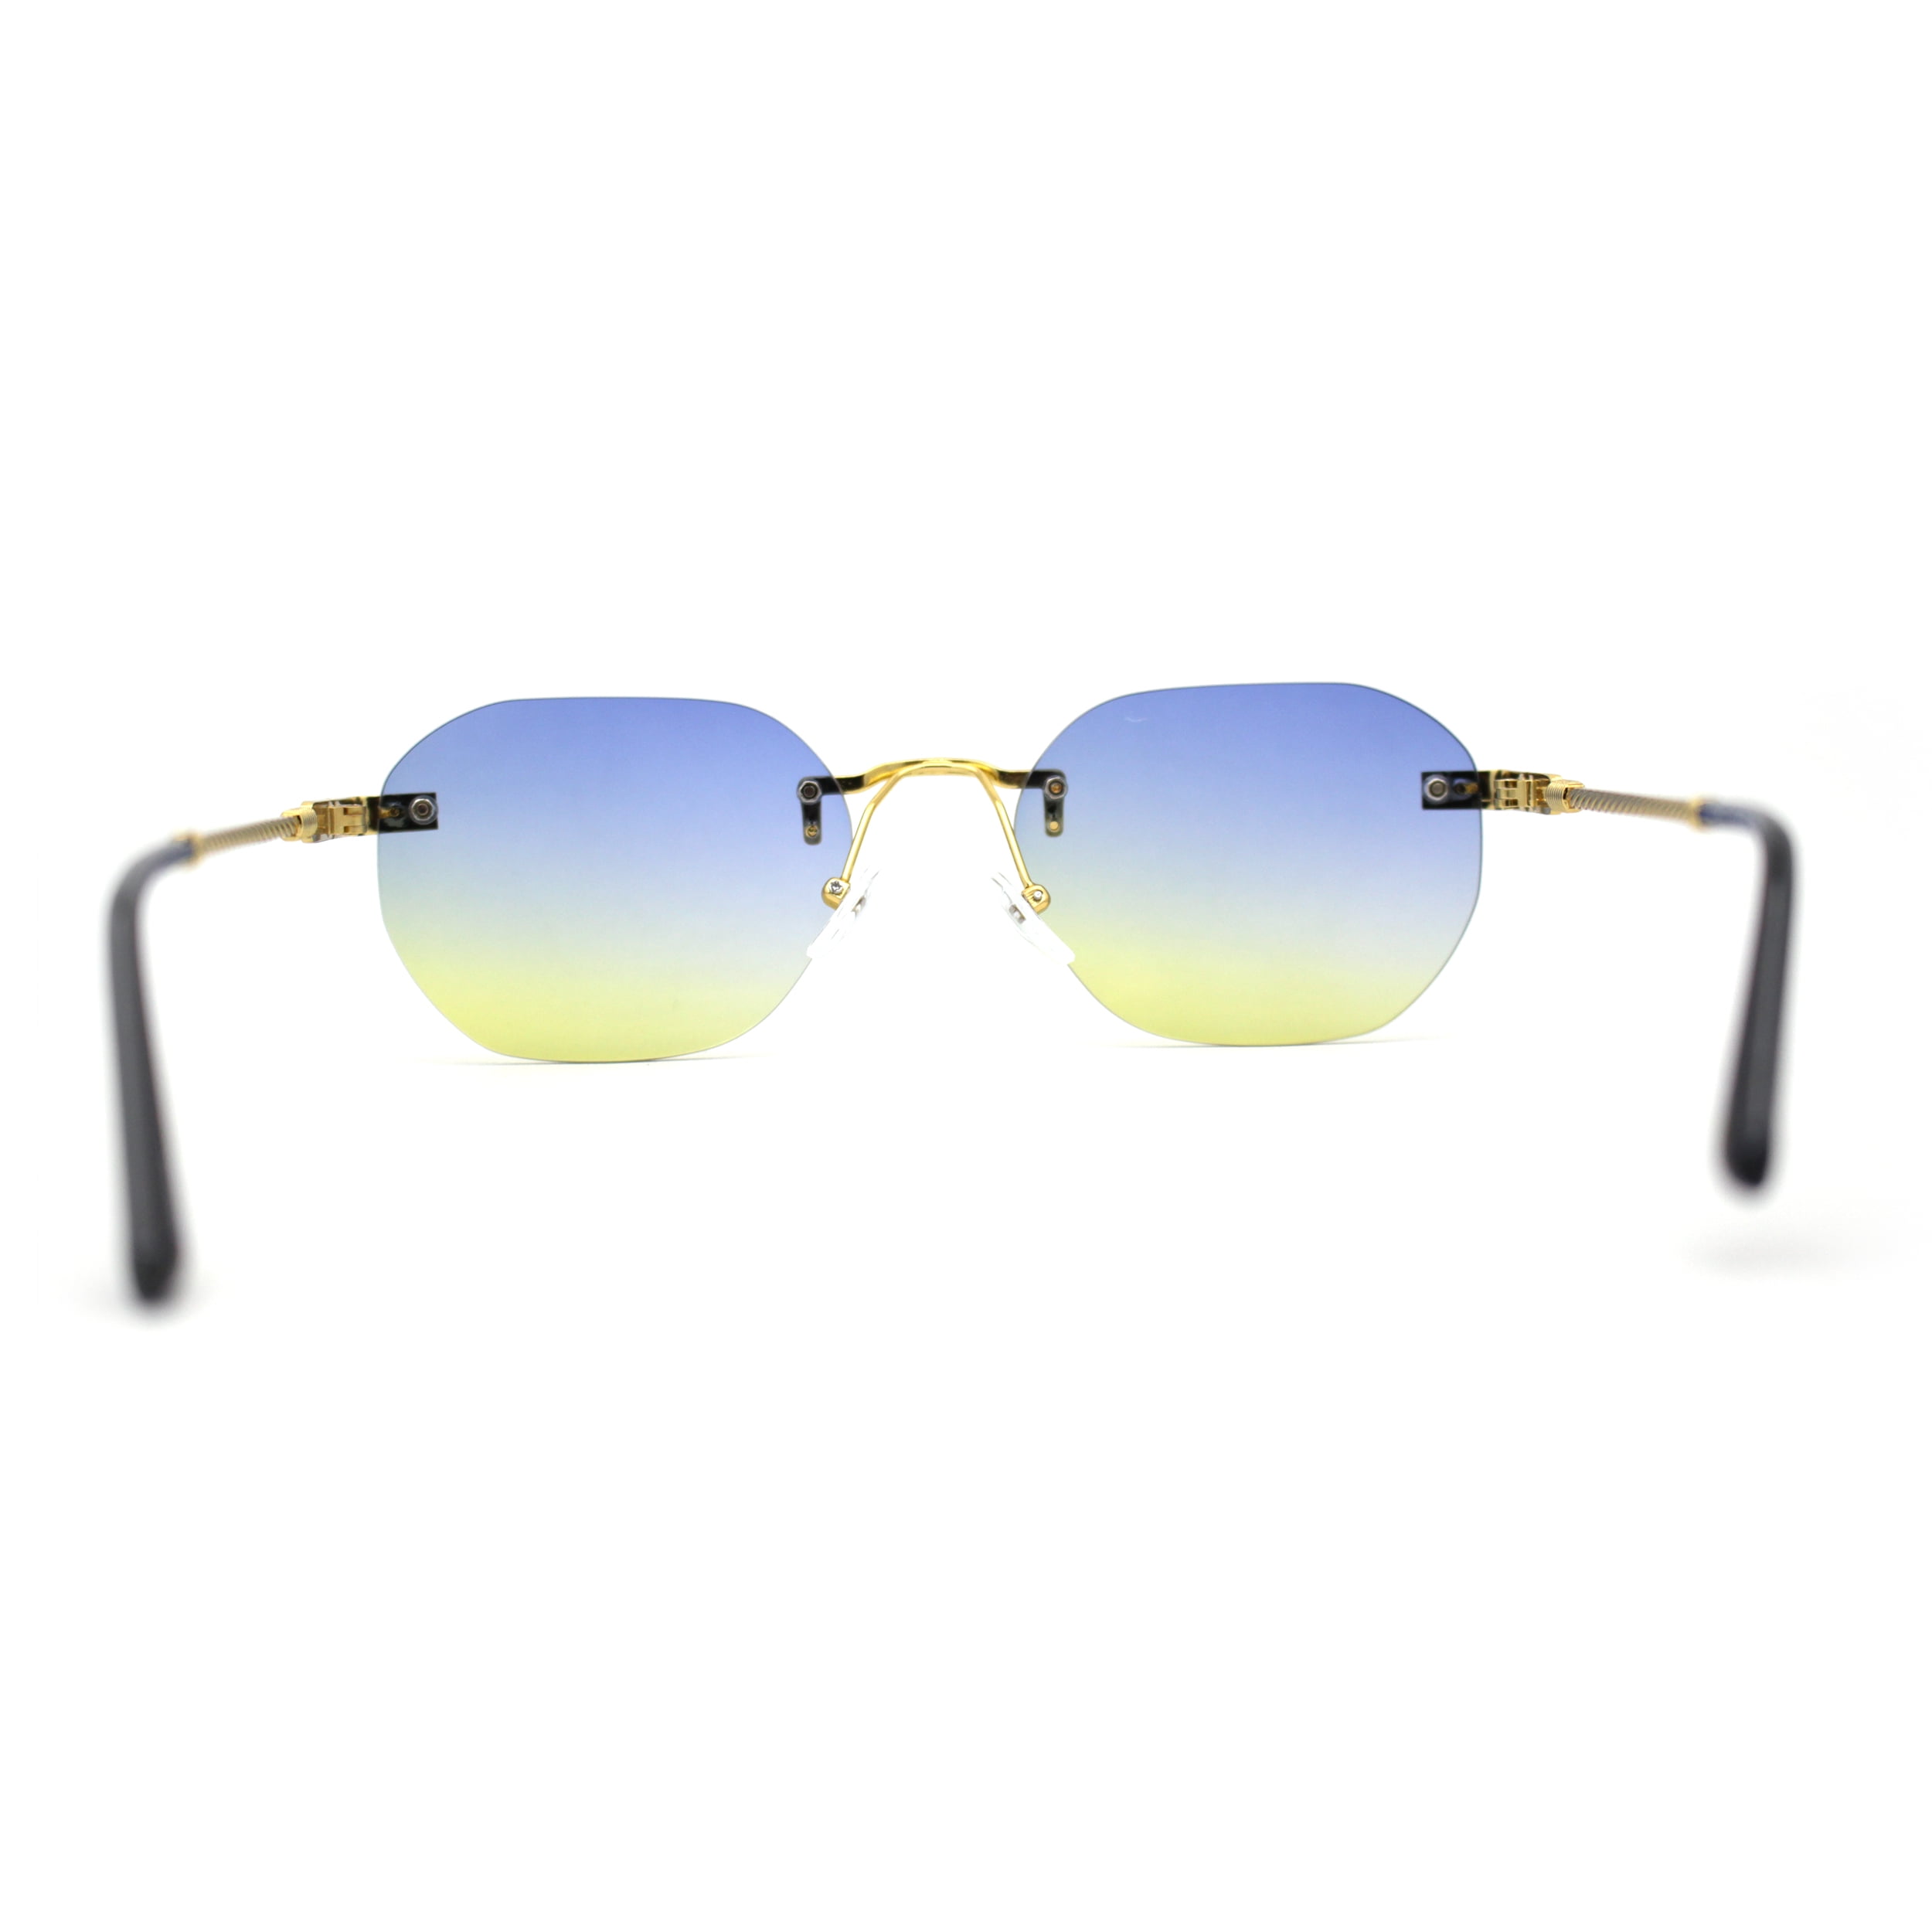 Designer Black And Gold Sunglasses For Men And Women Classic Square Full  Frame Vintage 1165 1.1 Shiny Gold Metal UV Protection Perfect For Outdoor  Activities From Luxurysunglasses, $46.31